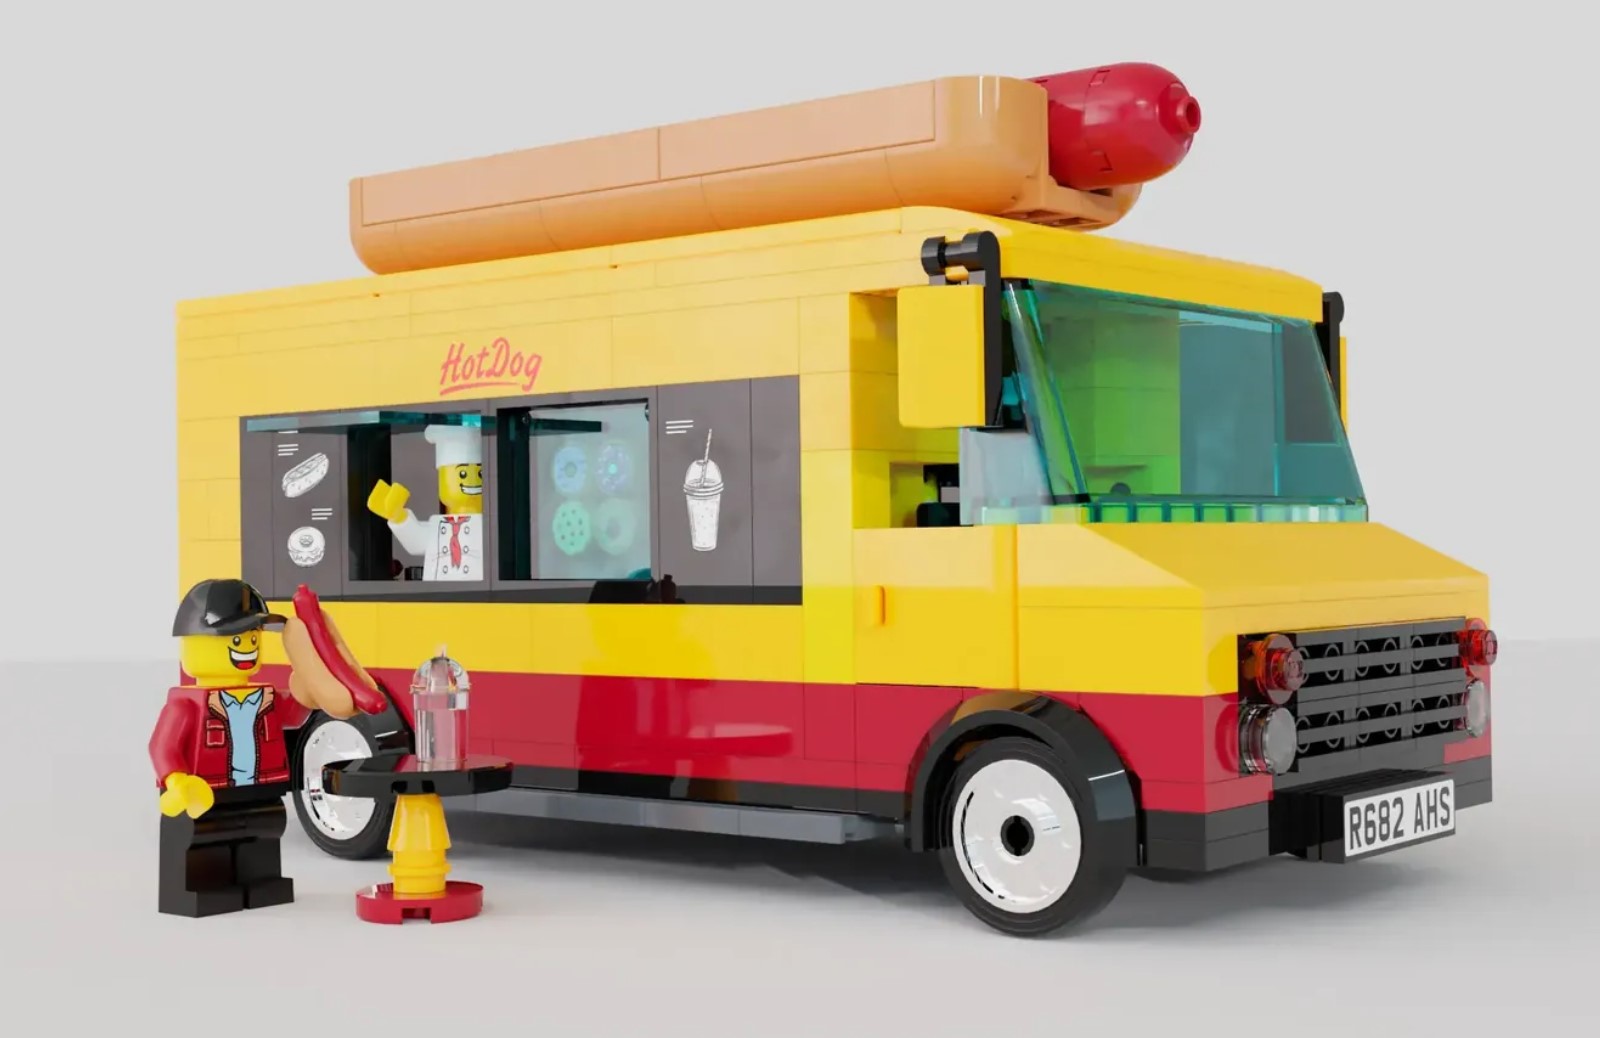 This LEGO Ideas Van Make a Great Addition to Any MOC City - autoevolution